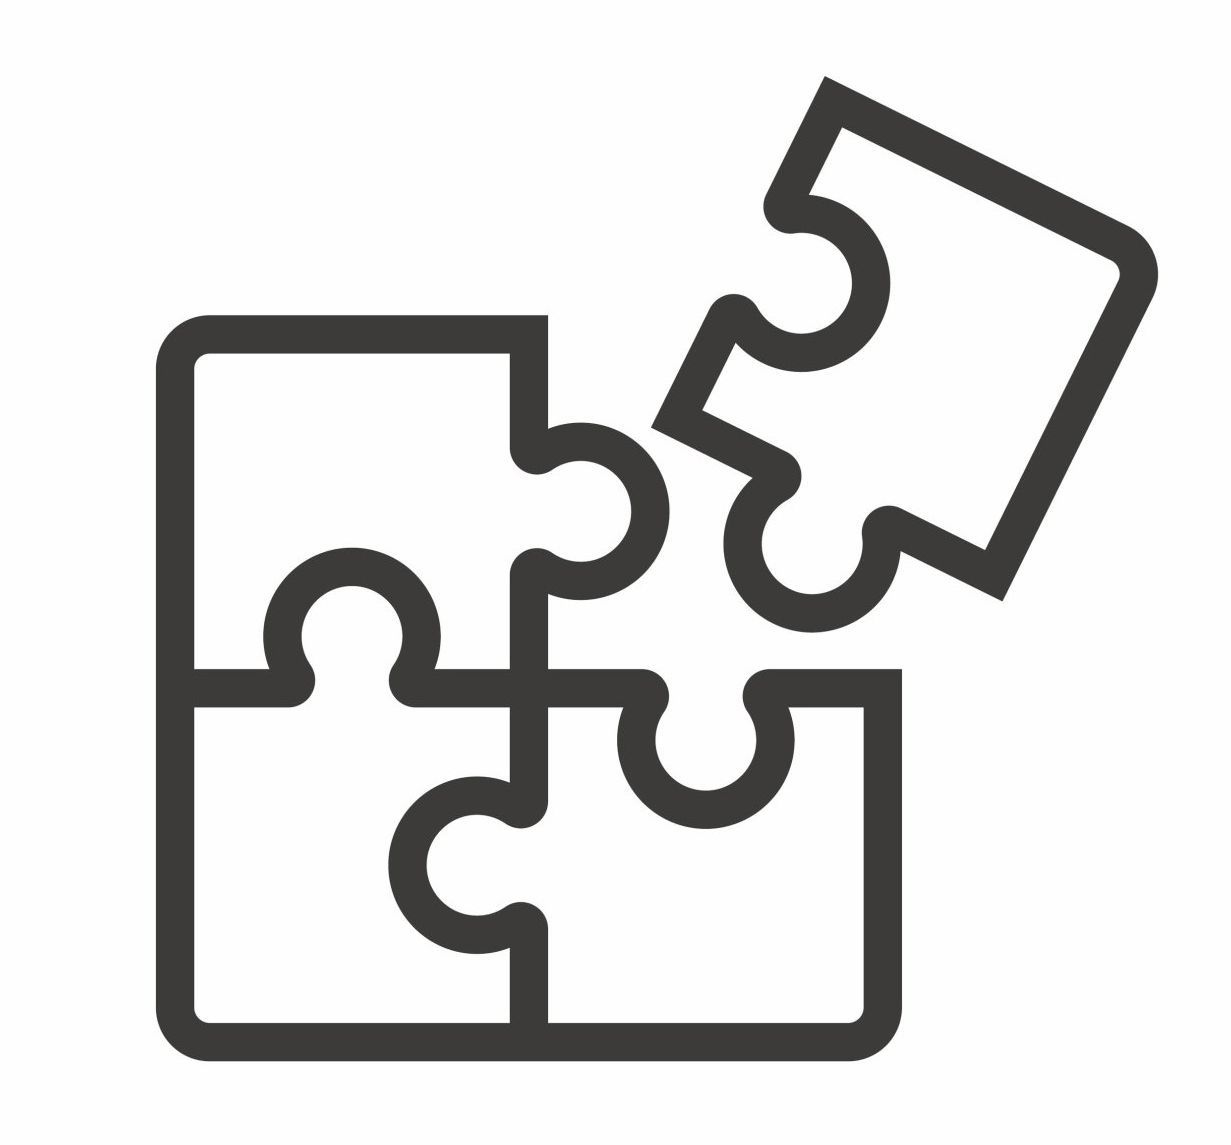 a jigsaw puzzle icon on a white background.